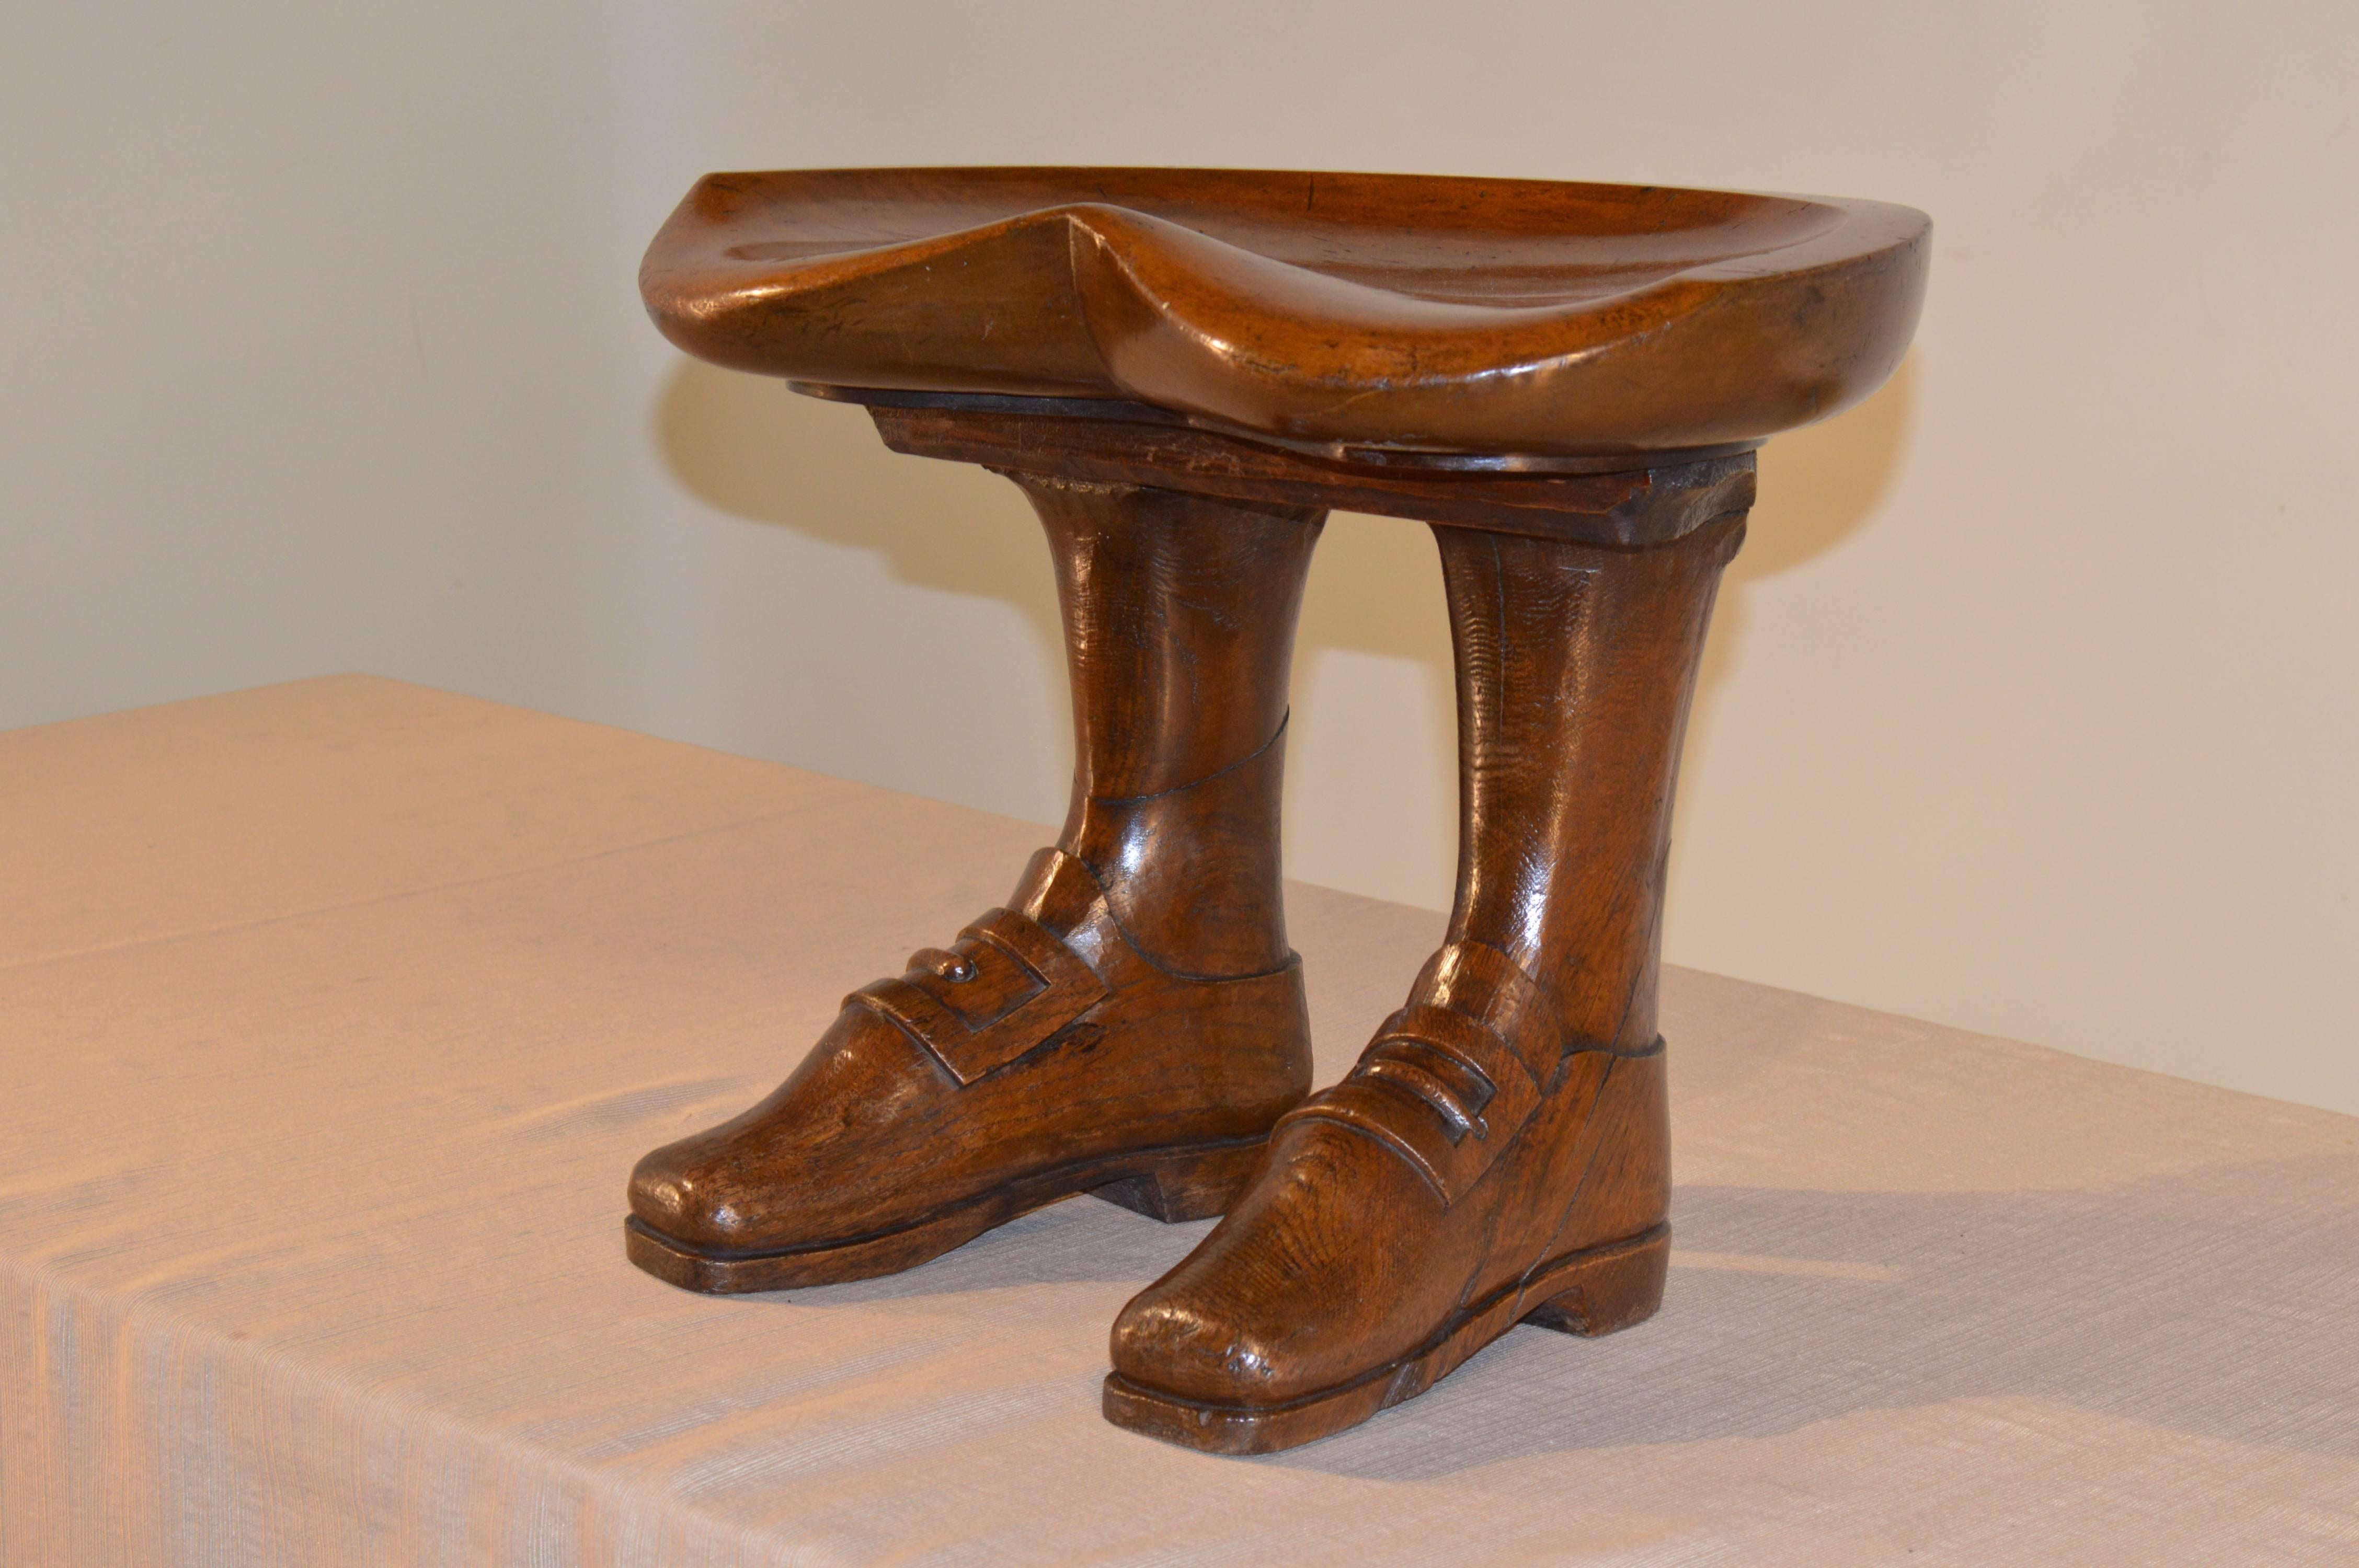 19th century English stool made from walnut. The seat is shaped and is supported upon two legs, which end in buckle-shoe 